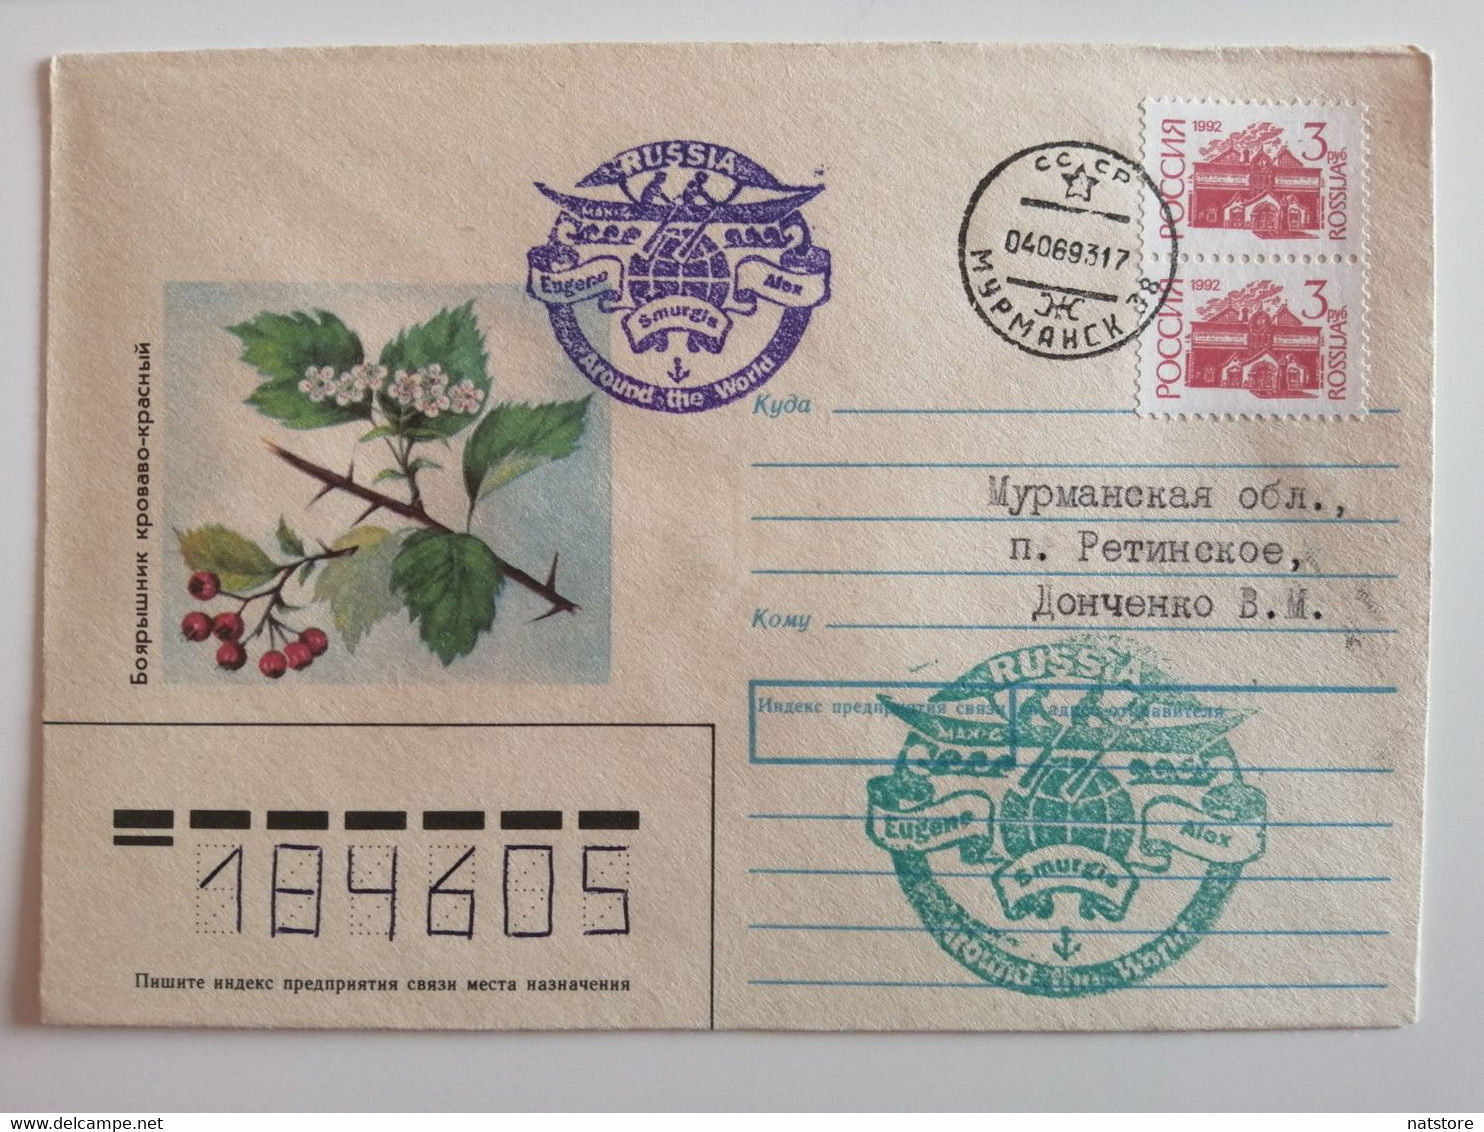 1989..USSR. COVER WITH GLUED STAMP AND SPECIAL CANCELLATION ''RUSSIA..EUGENE ALEX SMURGIS..AROUND THE WORLD'' - Research Programs